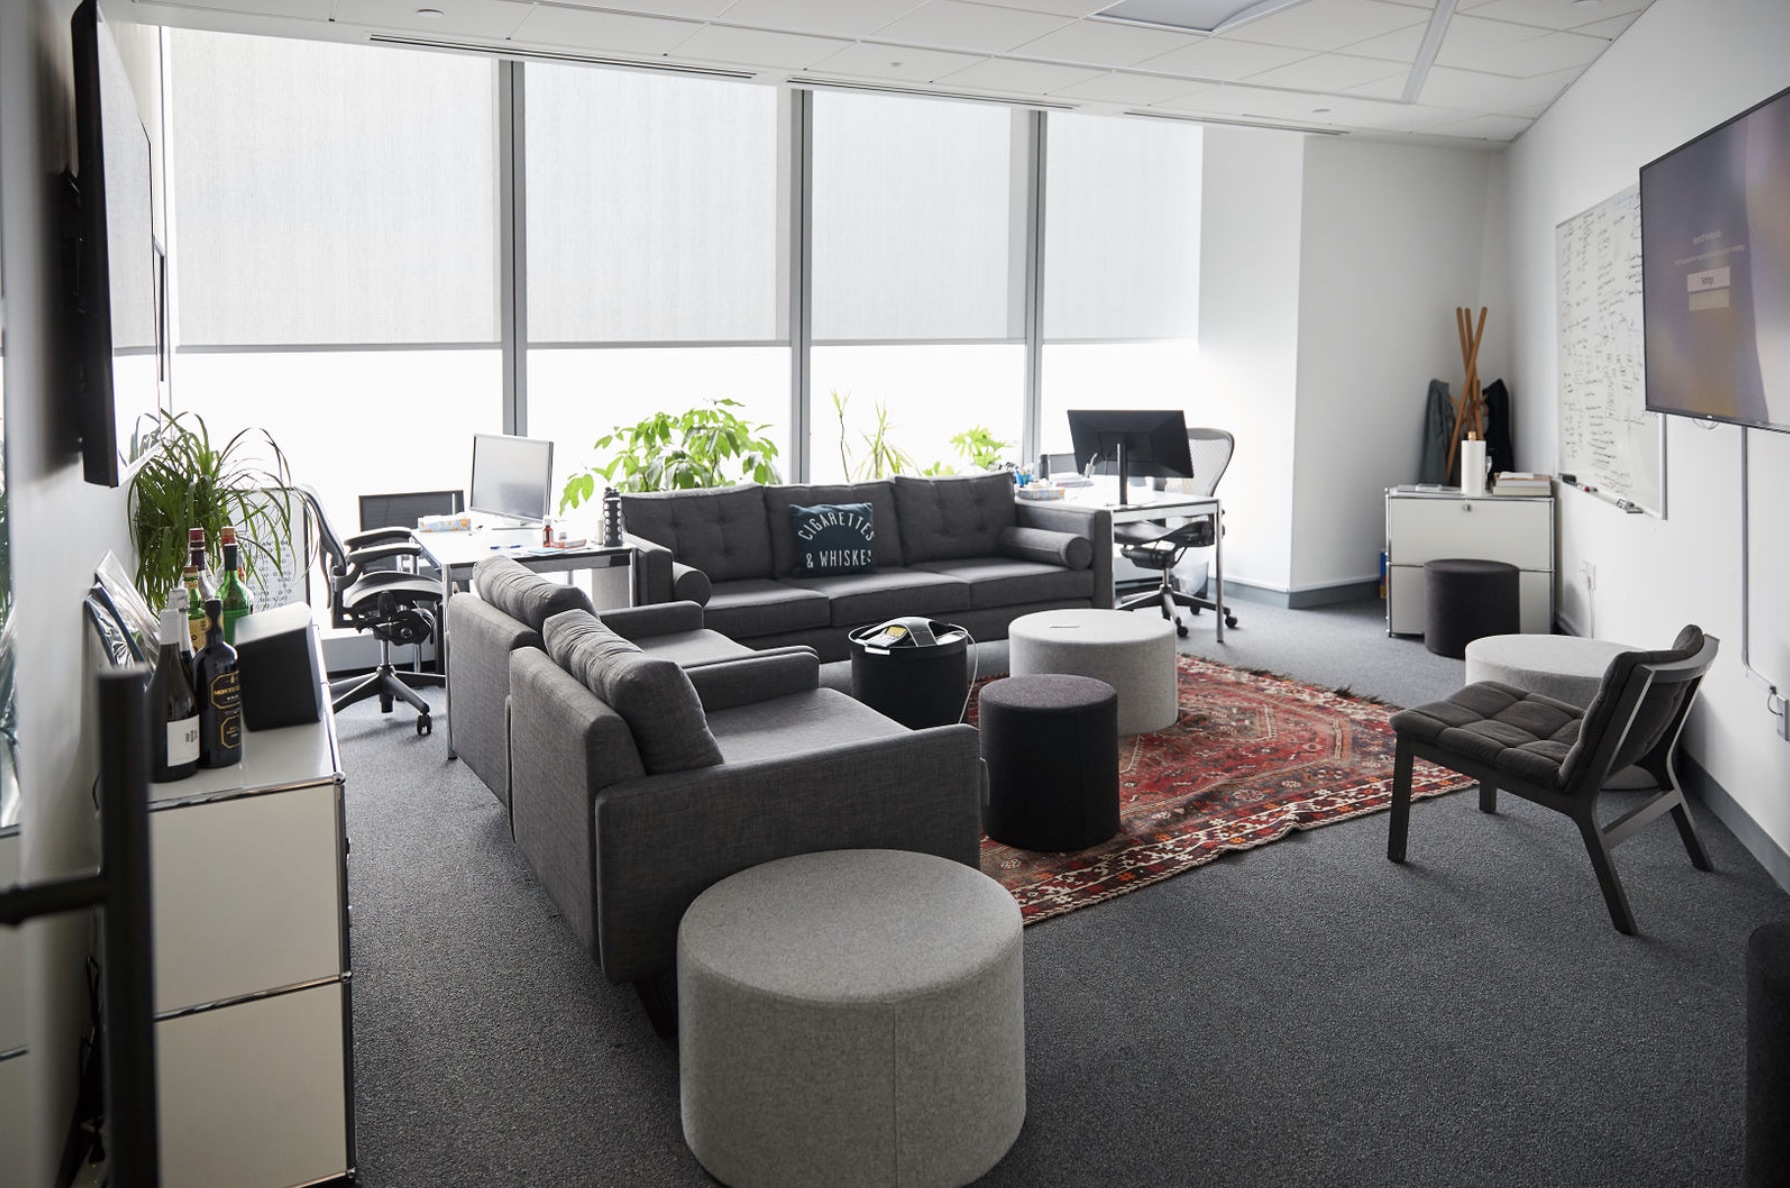 <i>The executive offices provide a space for both open and private discussion</i>